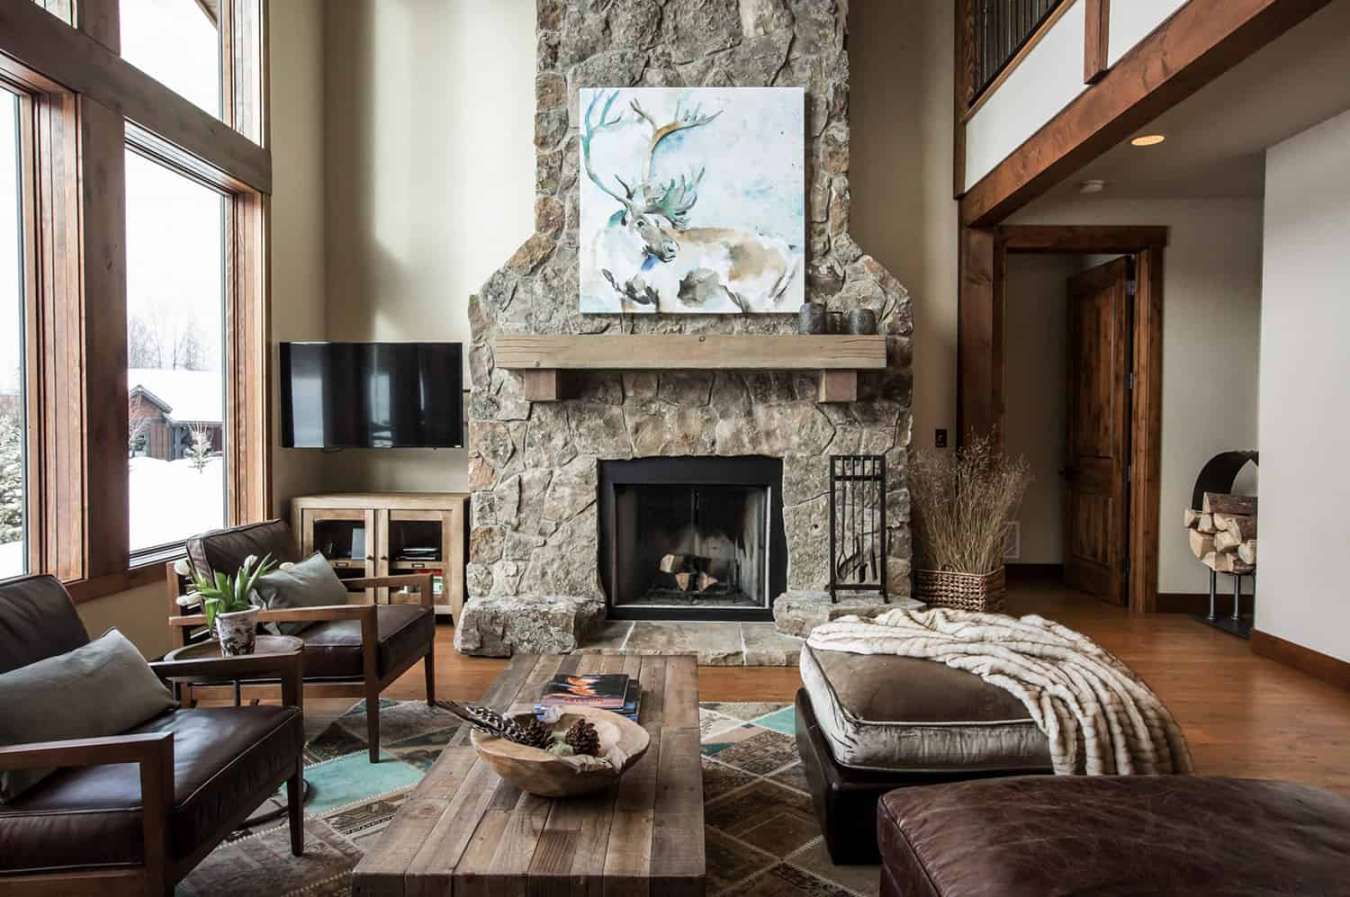 Outstanding Rustic Living Room Ideas That Have Cozy Fireplaces